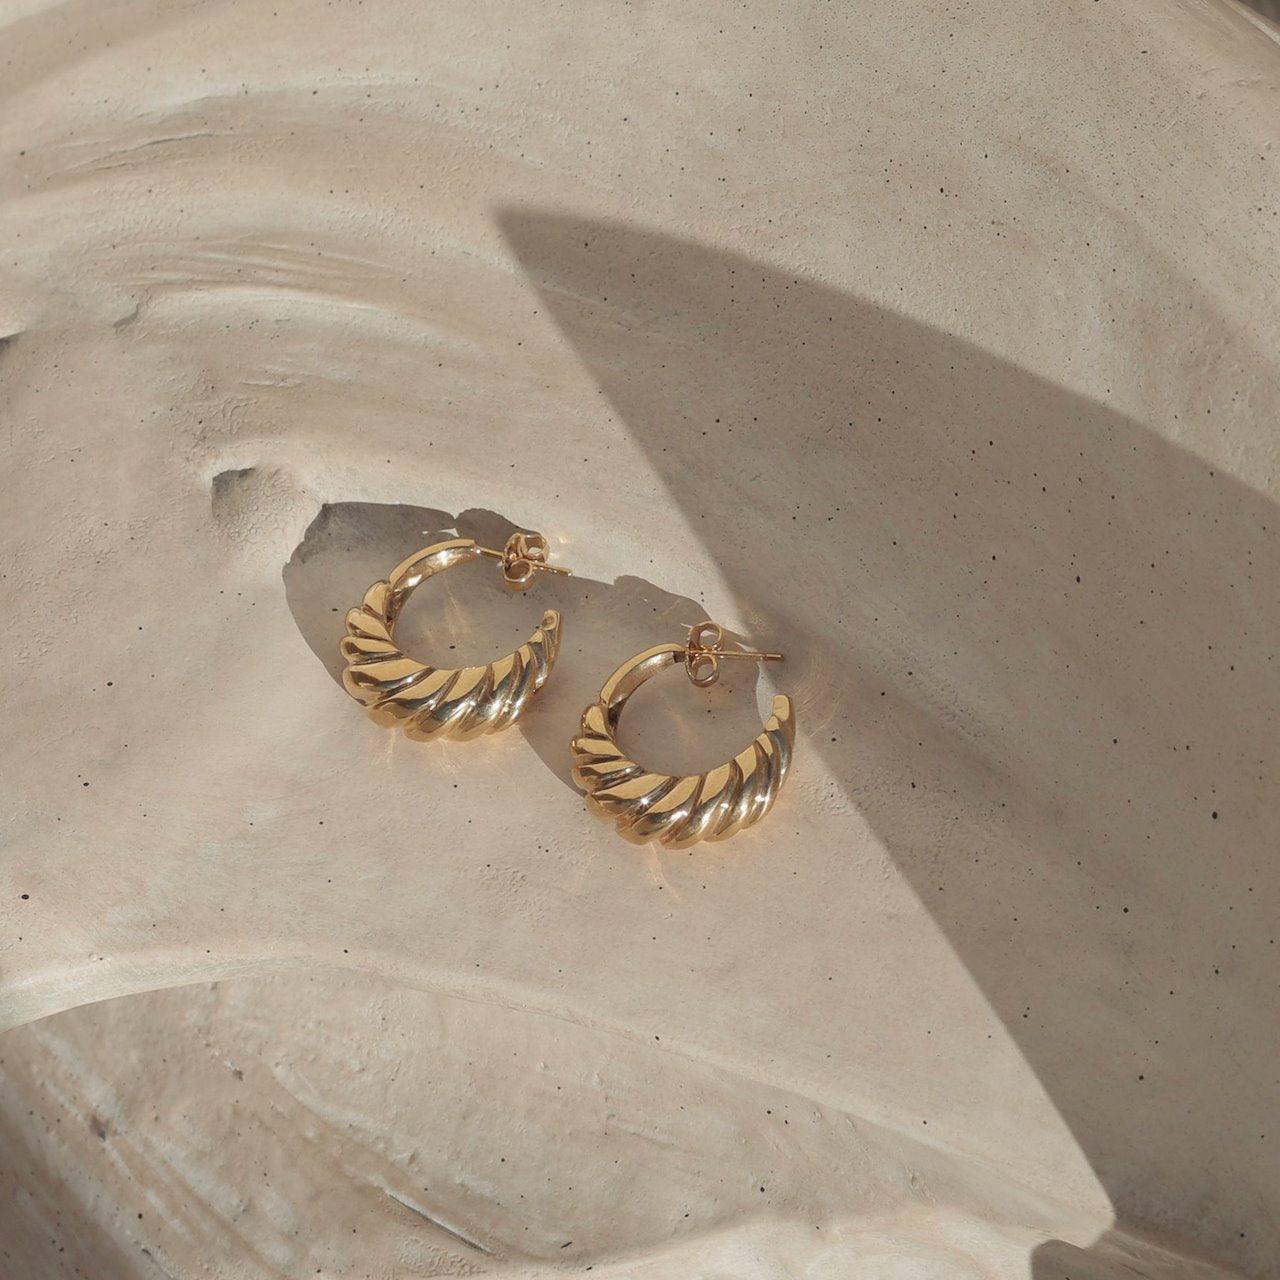 NAUTILUS SHELL HOOPS - 24K GOLD PLATE - THE SUS&TAIN STORE